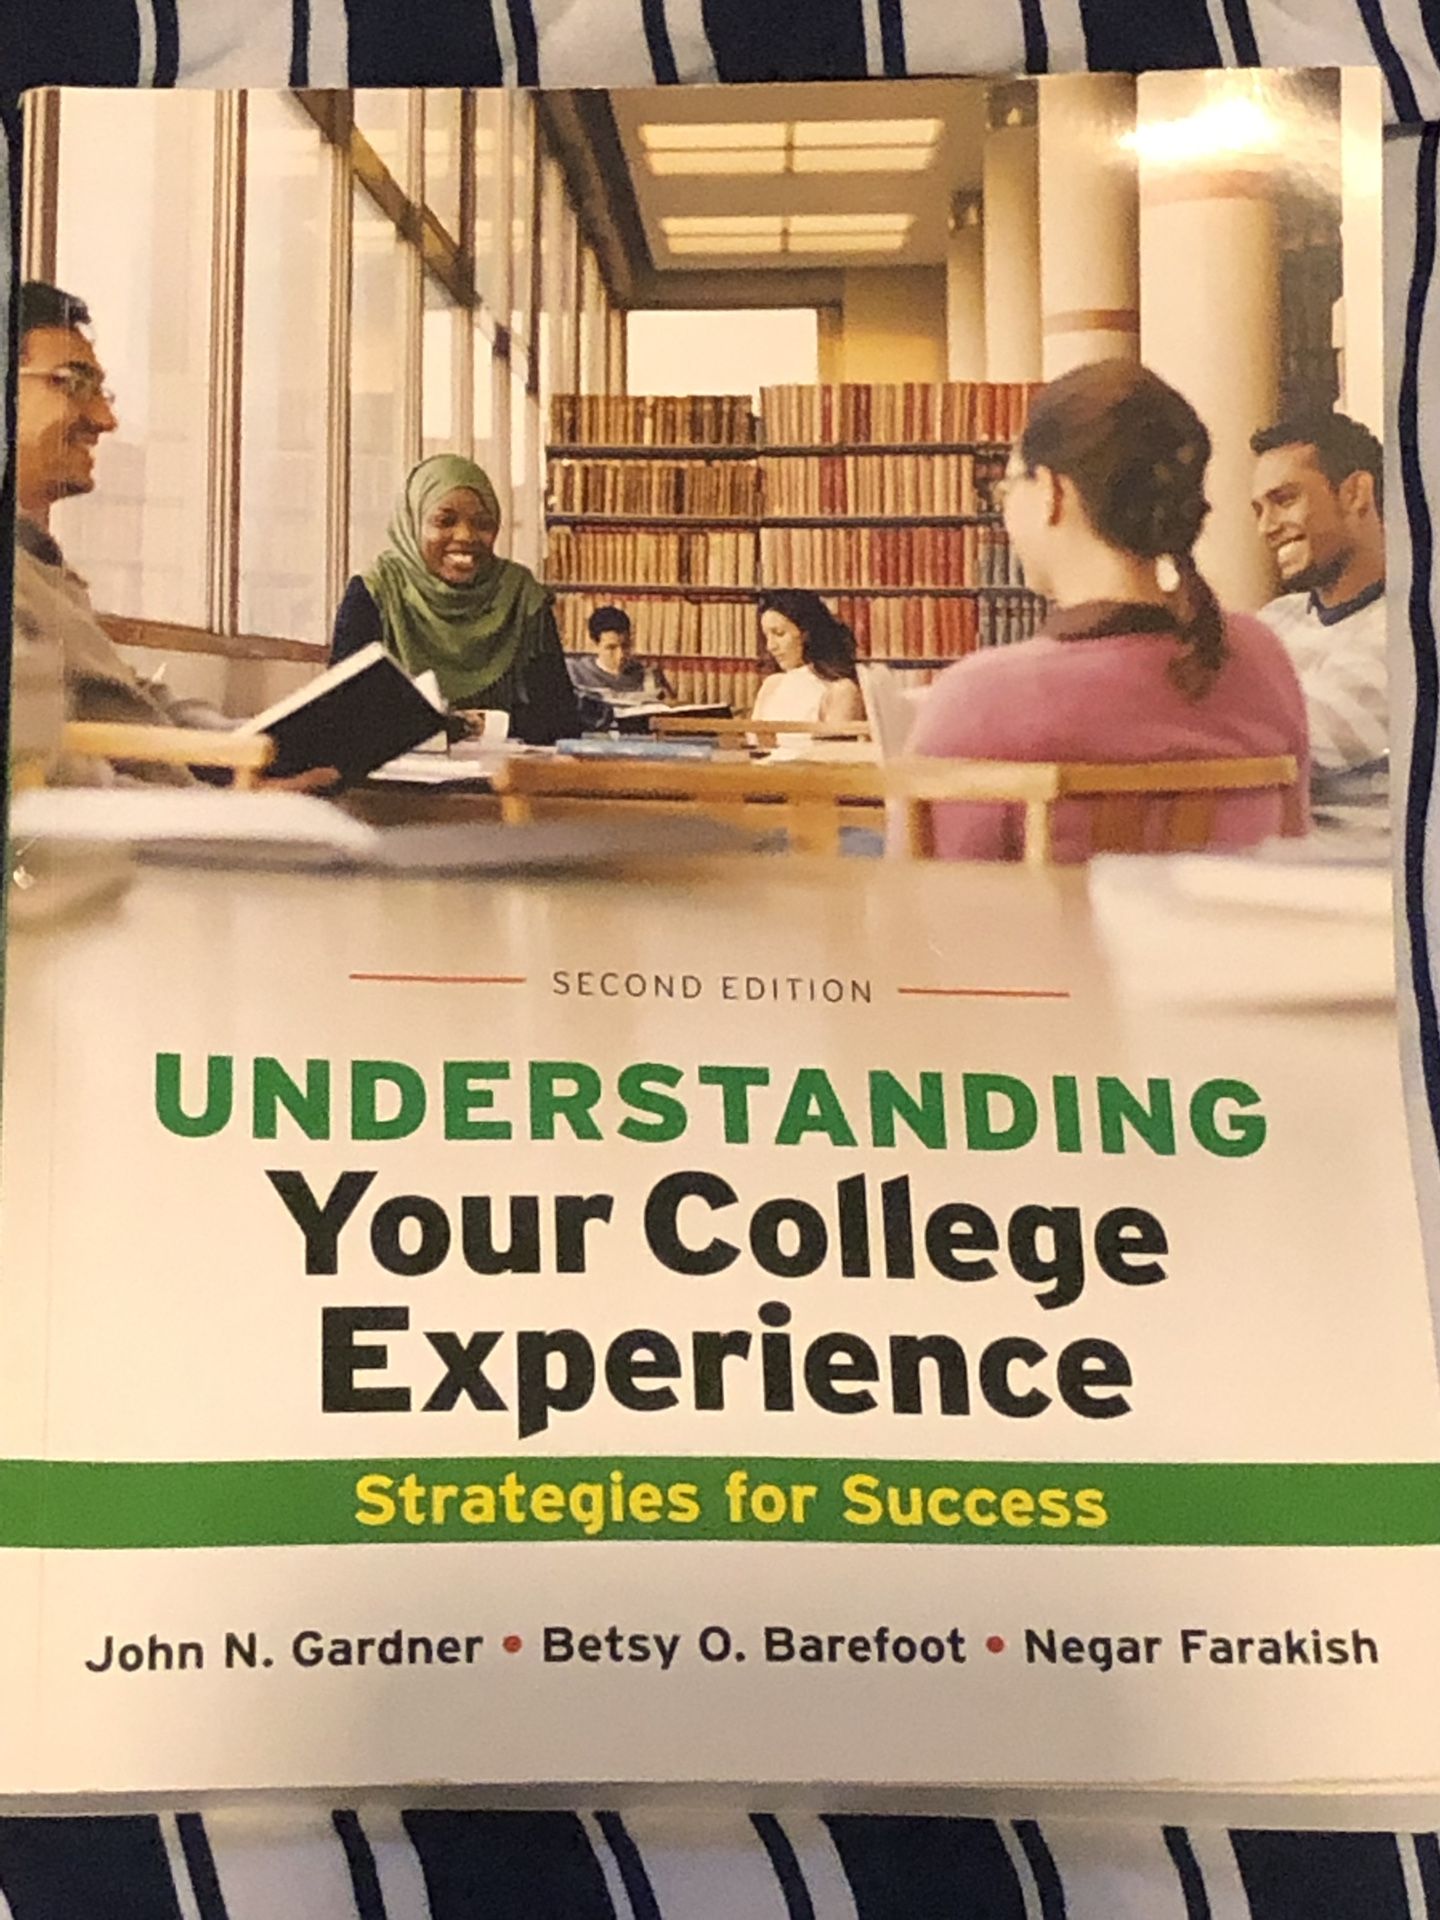 Understanding Your College Experience Strategies for Success Second Edition